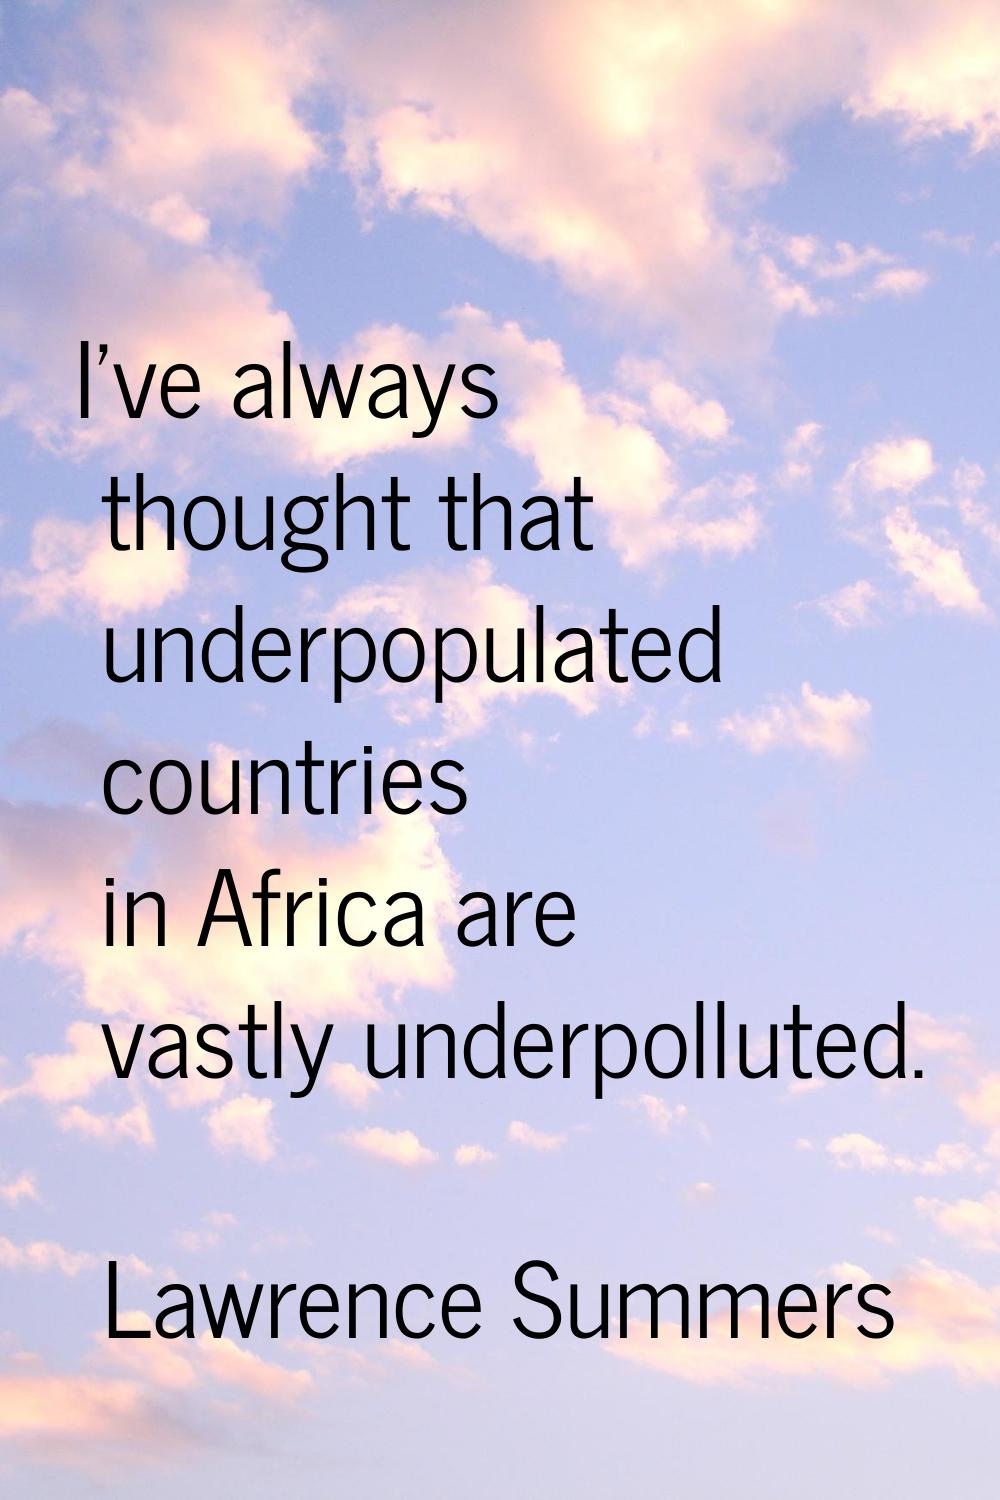 I've always thought that underpopulated countries in Africa are vastly underpolluted.